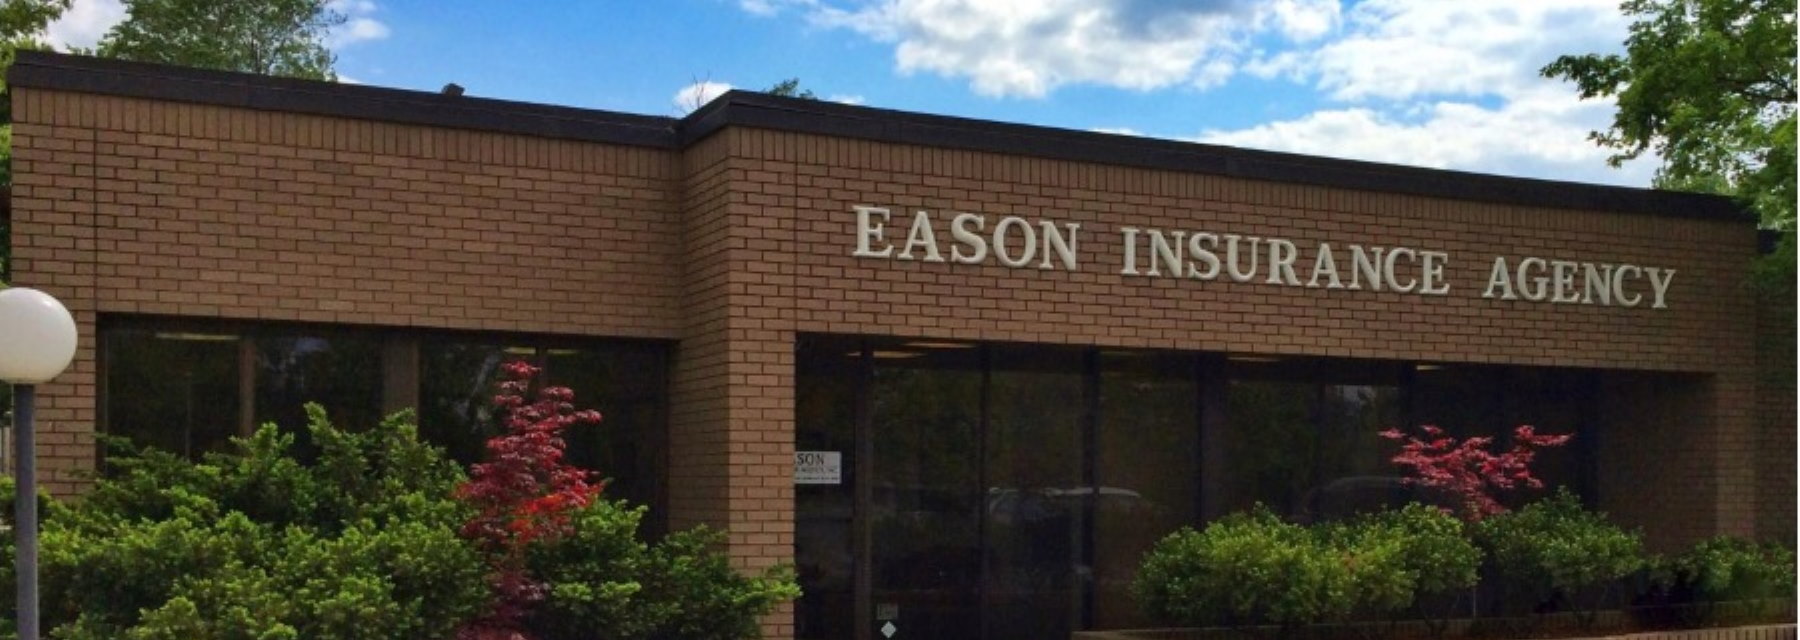 front of Eason Insurance Agency building